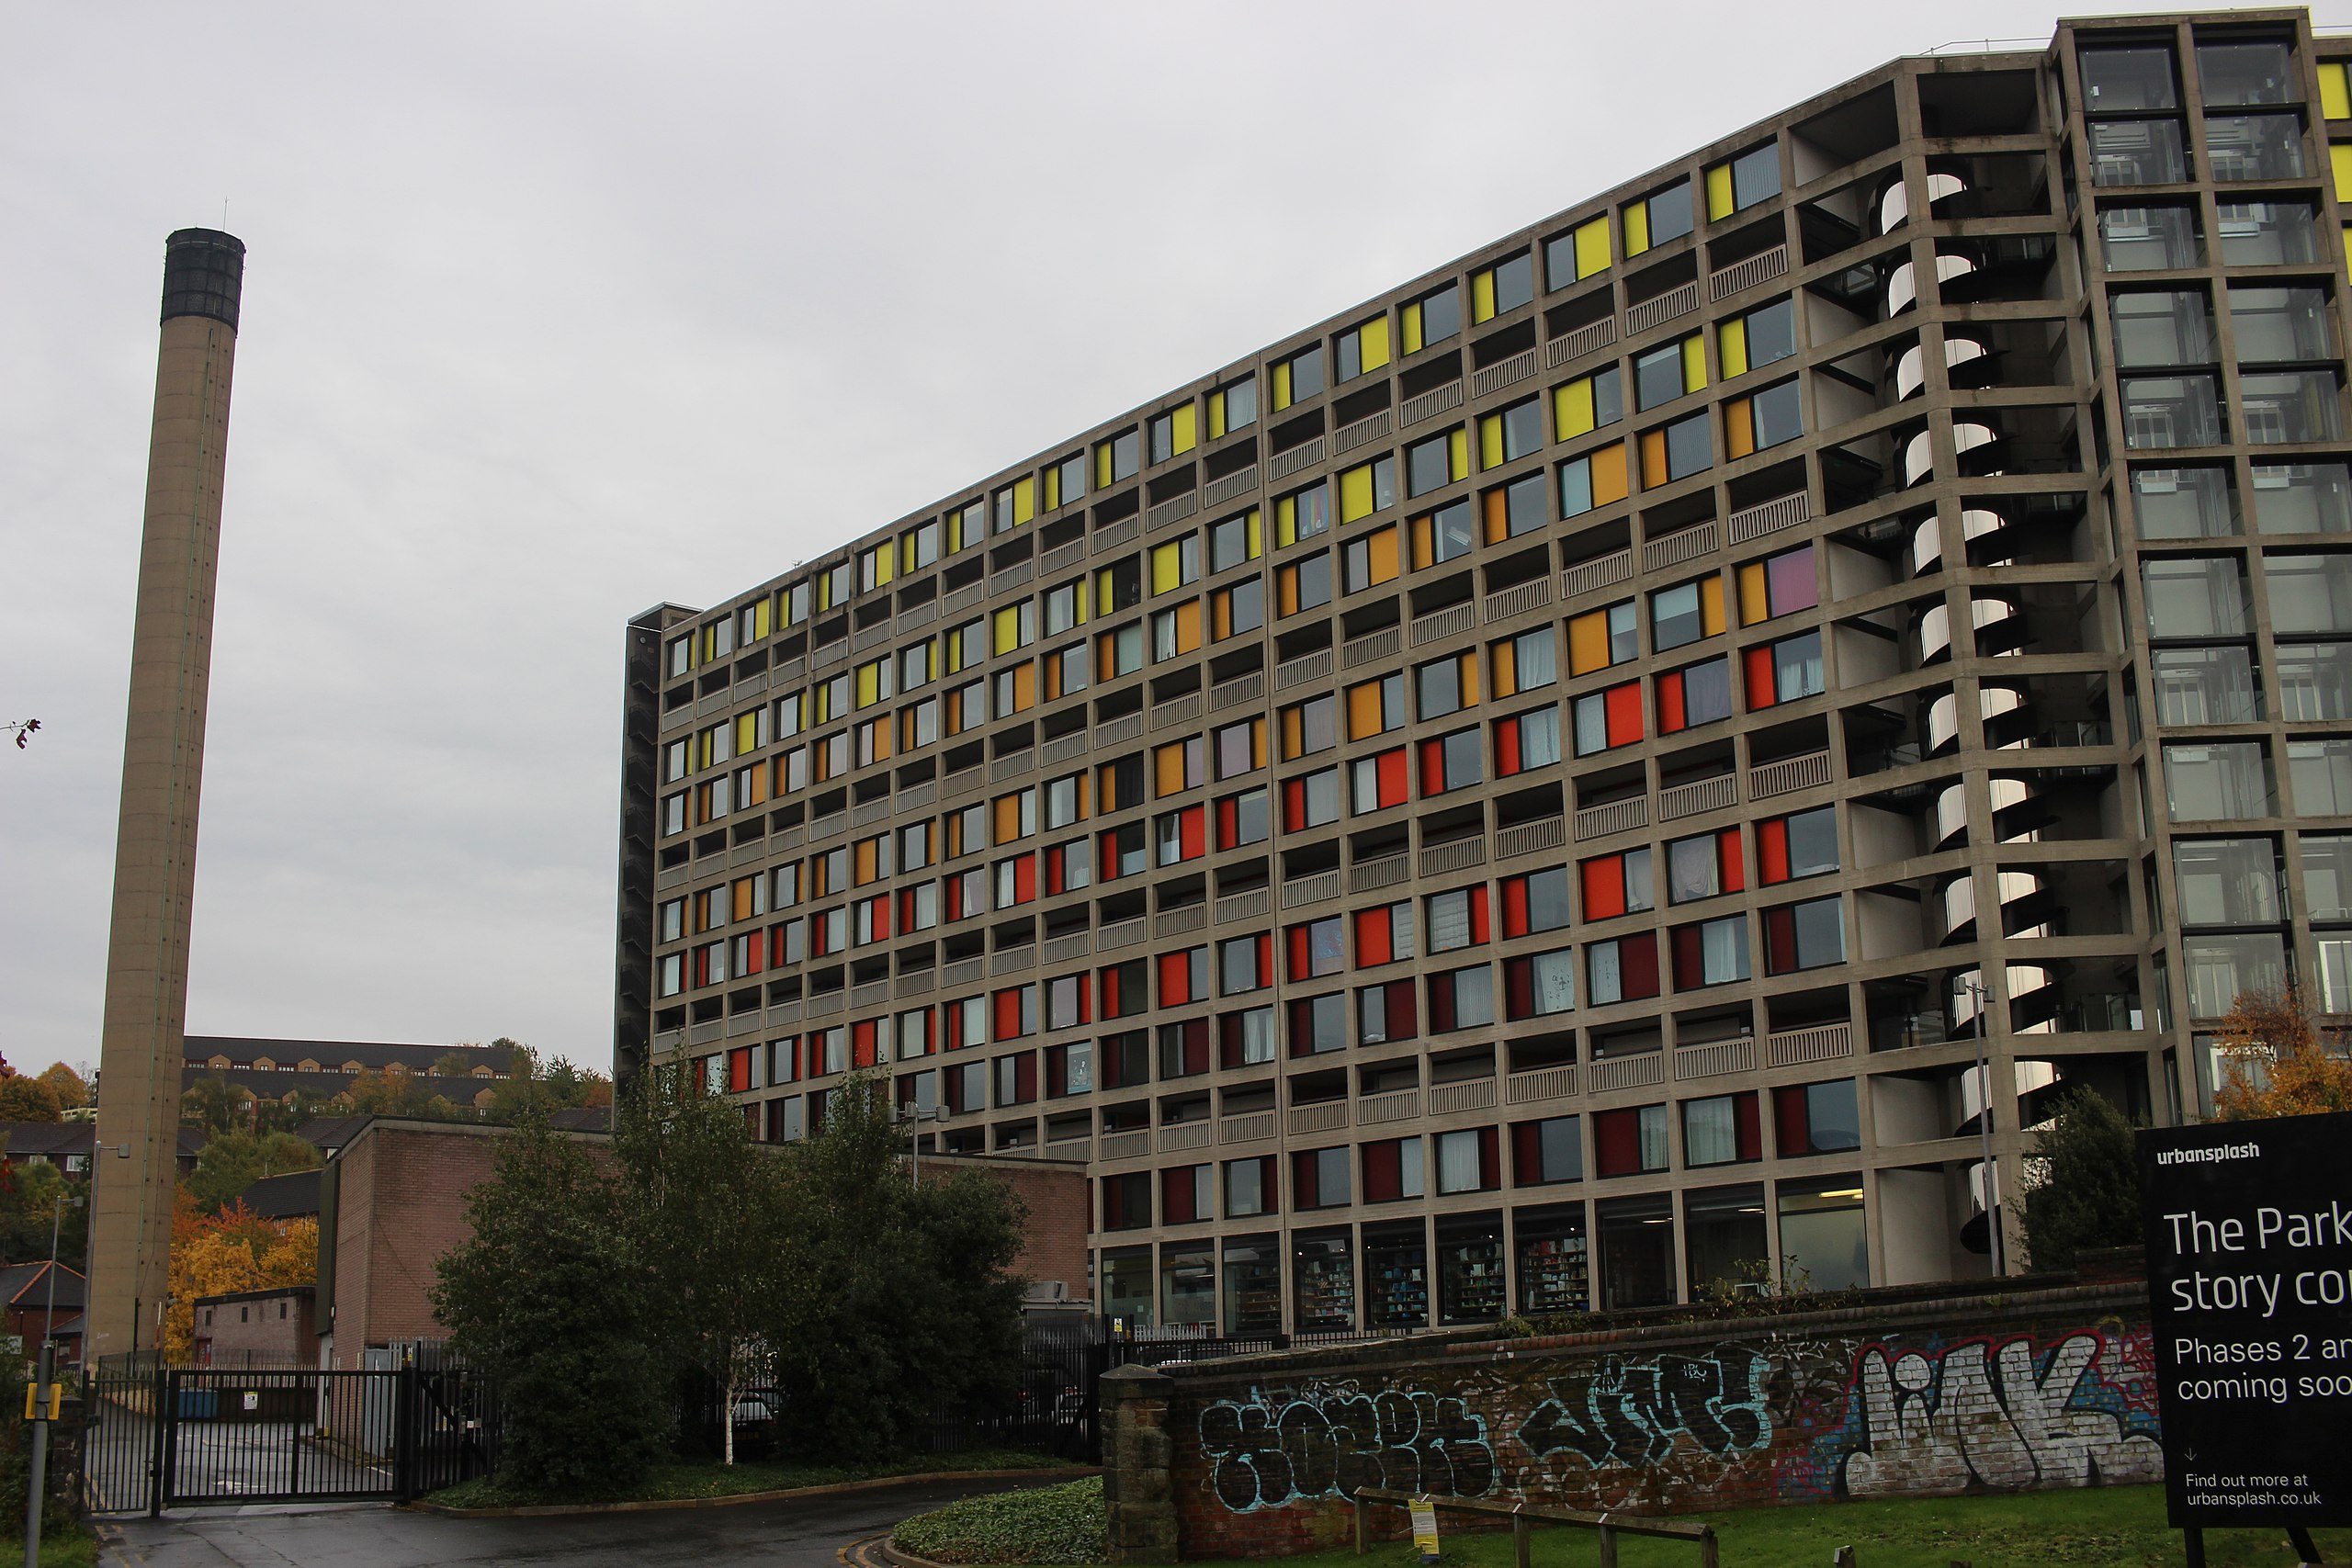 A concrete block of flats with rainbow cladding, against a grey sky and across from a smoke stack.